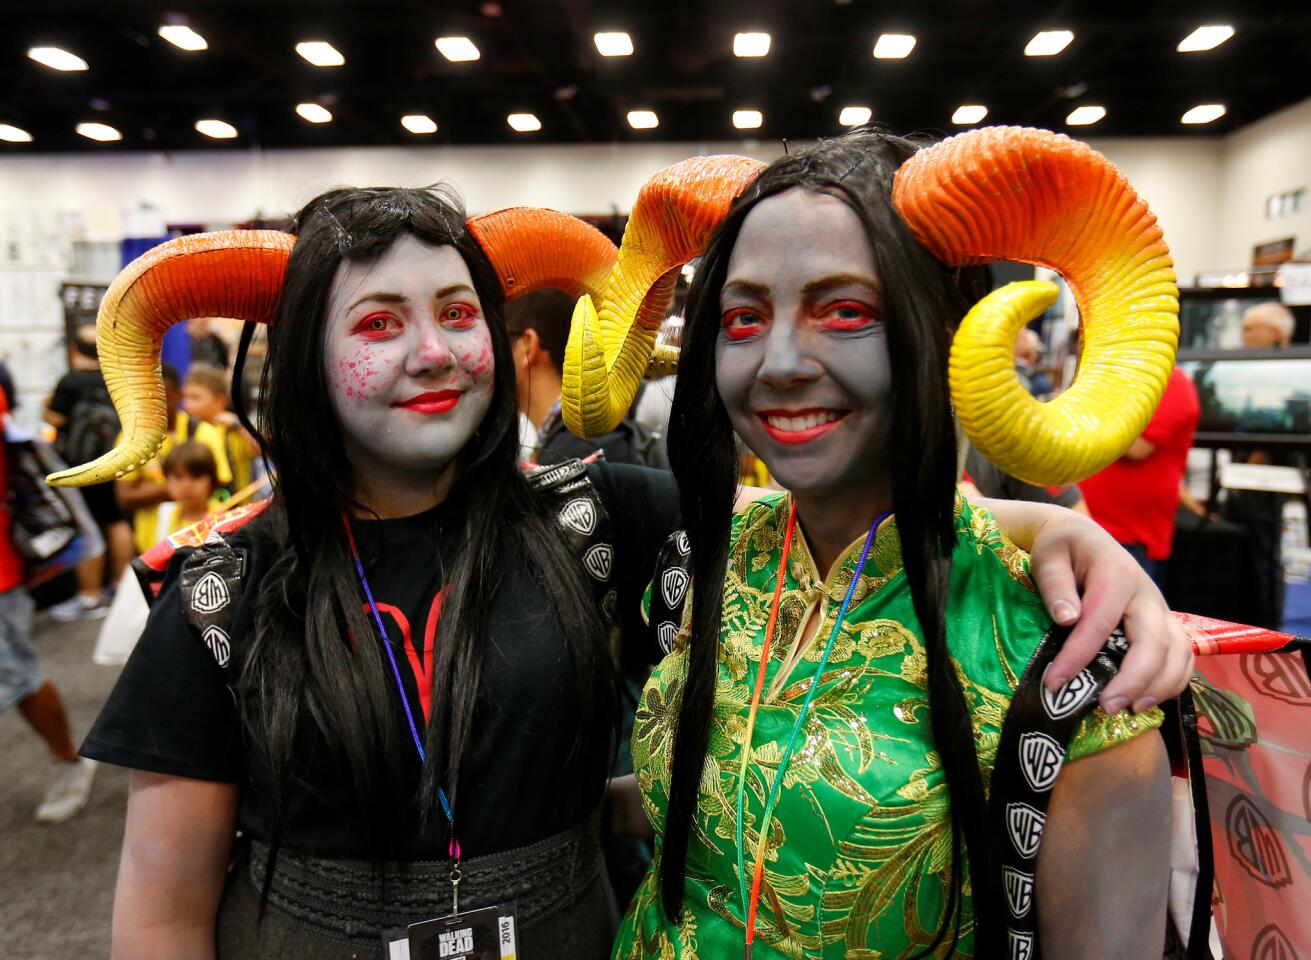 Karen Ward and Samantha Ward dressed as characters from "Homestruck" attend the opening day of Comic-Con International in San Diego